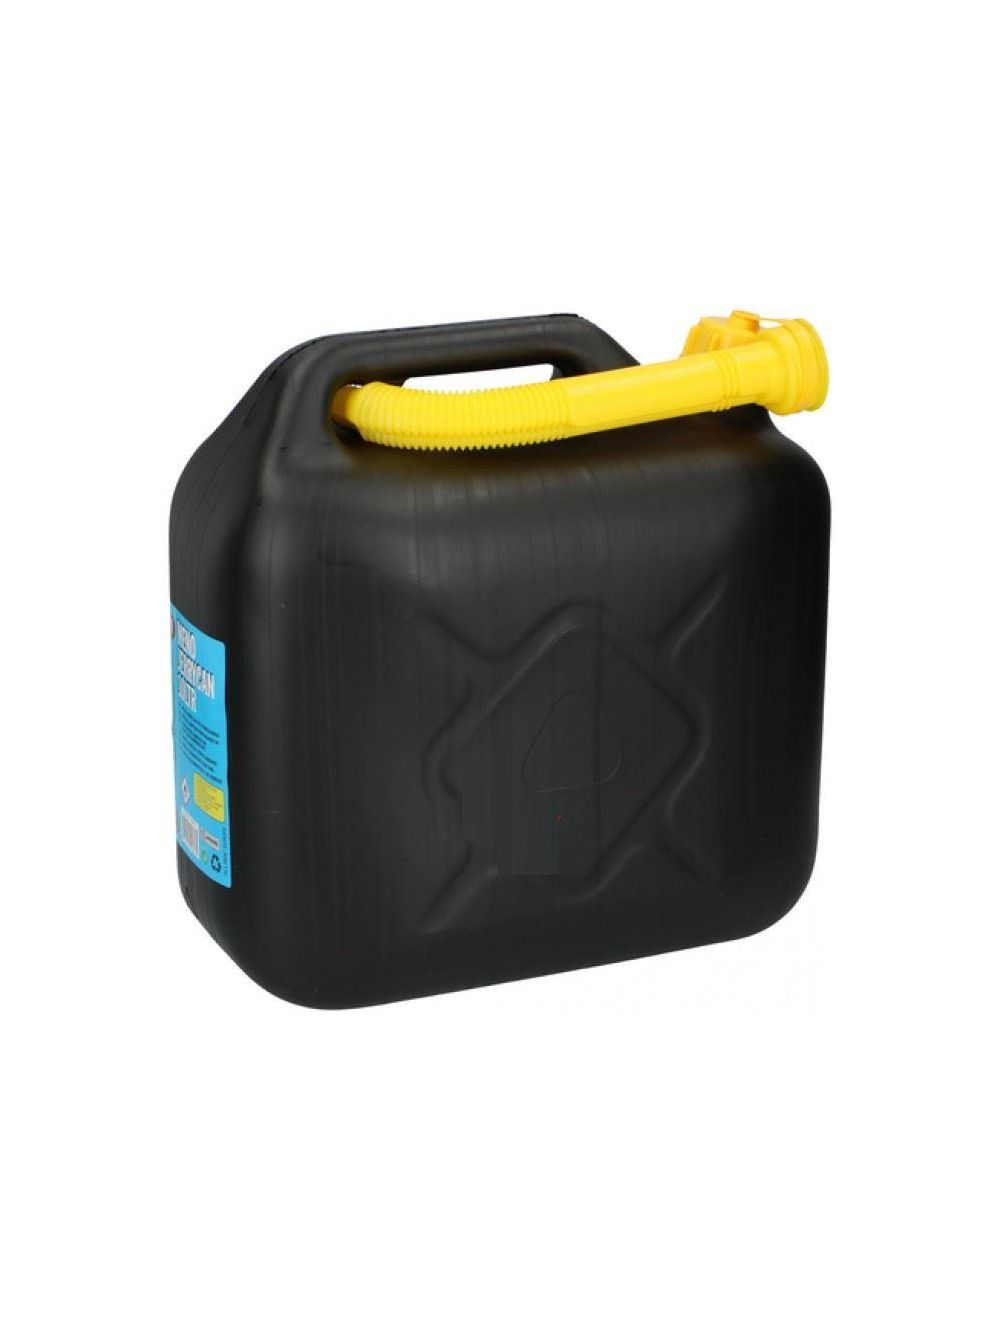 Unibos 10L Black Plastic Fuel Jerry Can Petrol Diesel Water With Spout 